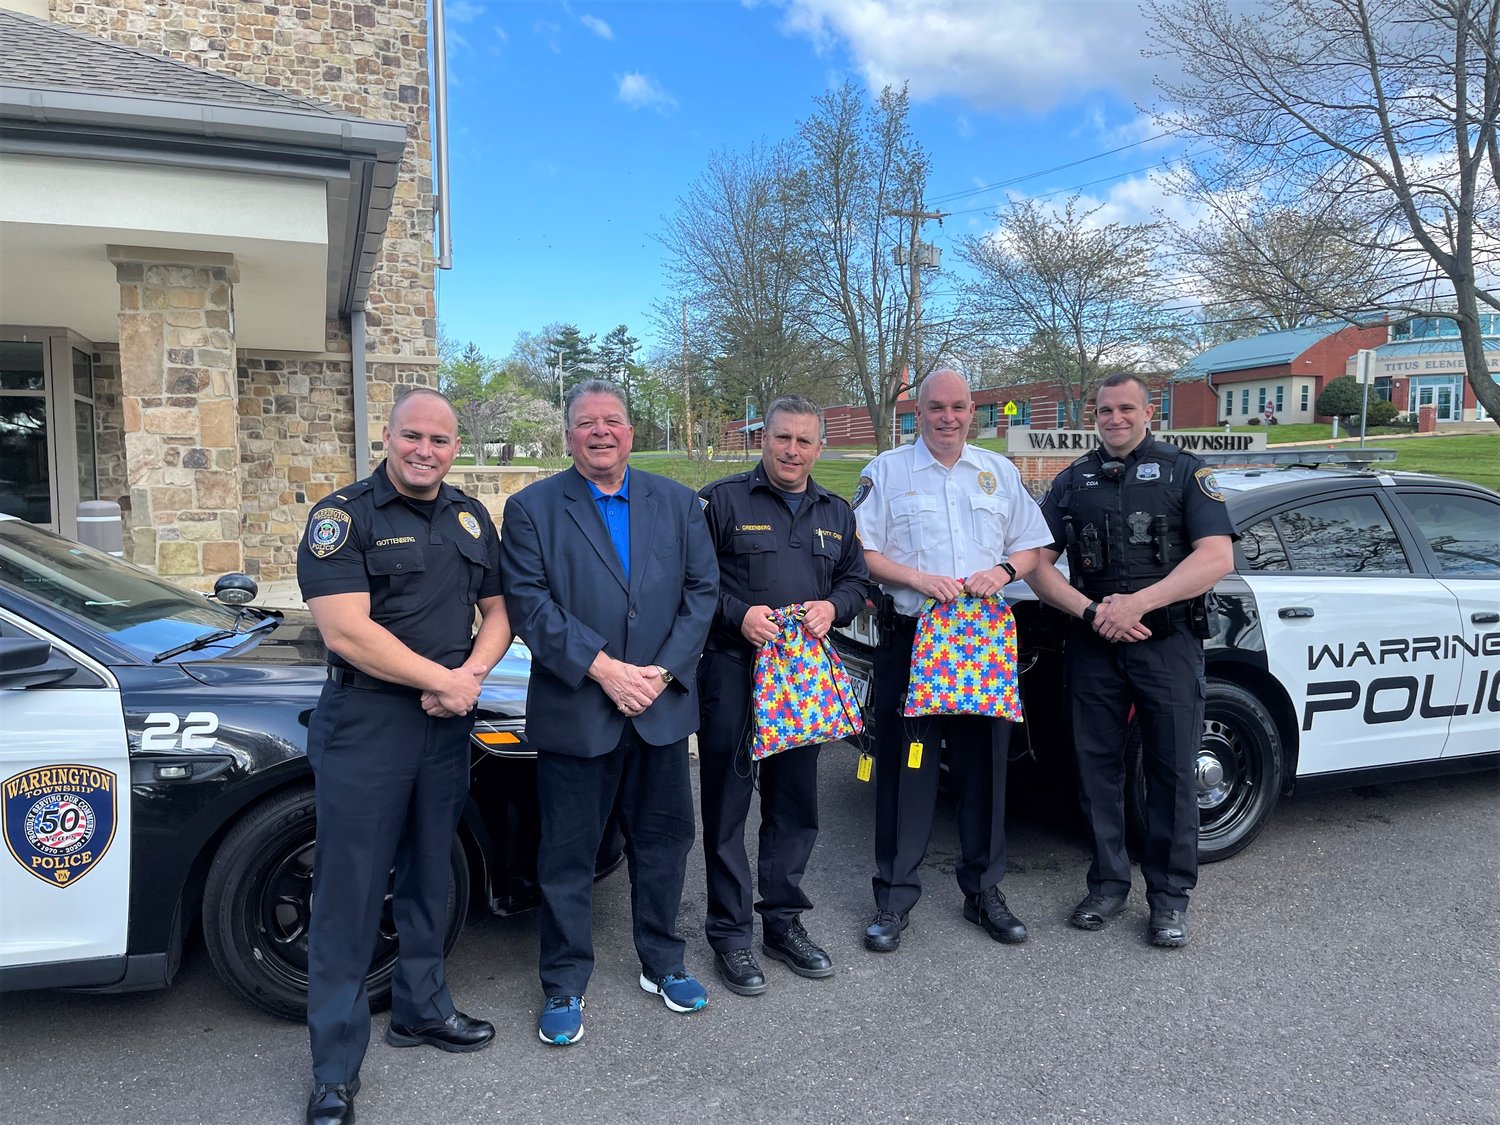 Warrington Rotary Club President Lou Altomari presents the Warrington Township Police Department with Autism Sensory Kits. These kits will be used to help to calm a person with autism on occasions when they come into contact with police officers. From left are: Lt. Glen Gottenberg, Warrington Township Police Department; Altomari; Lee Greenberg, director of emergency services, Warrington Township; Chief Daniel Friel, Warrington Township Police Department; Officer Nate Coia, Warrington Township Police Department.